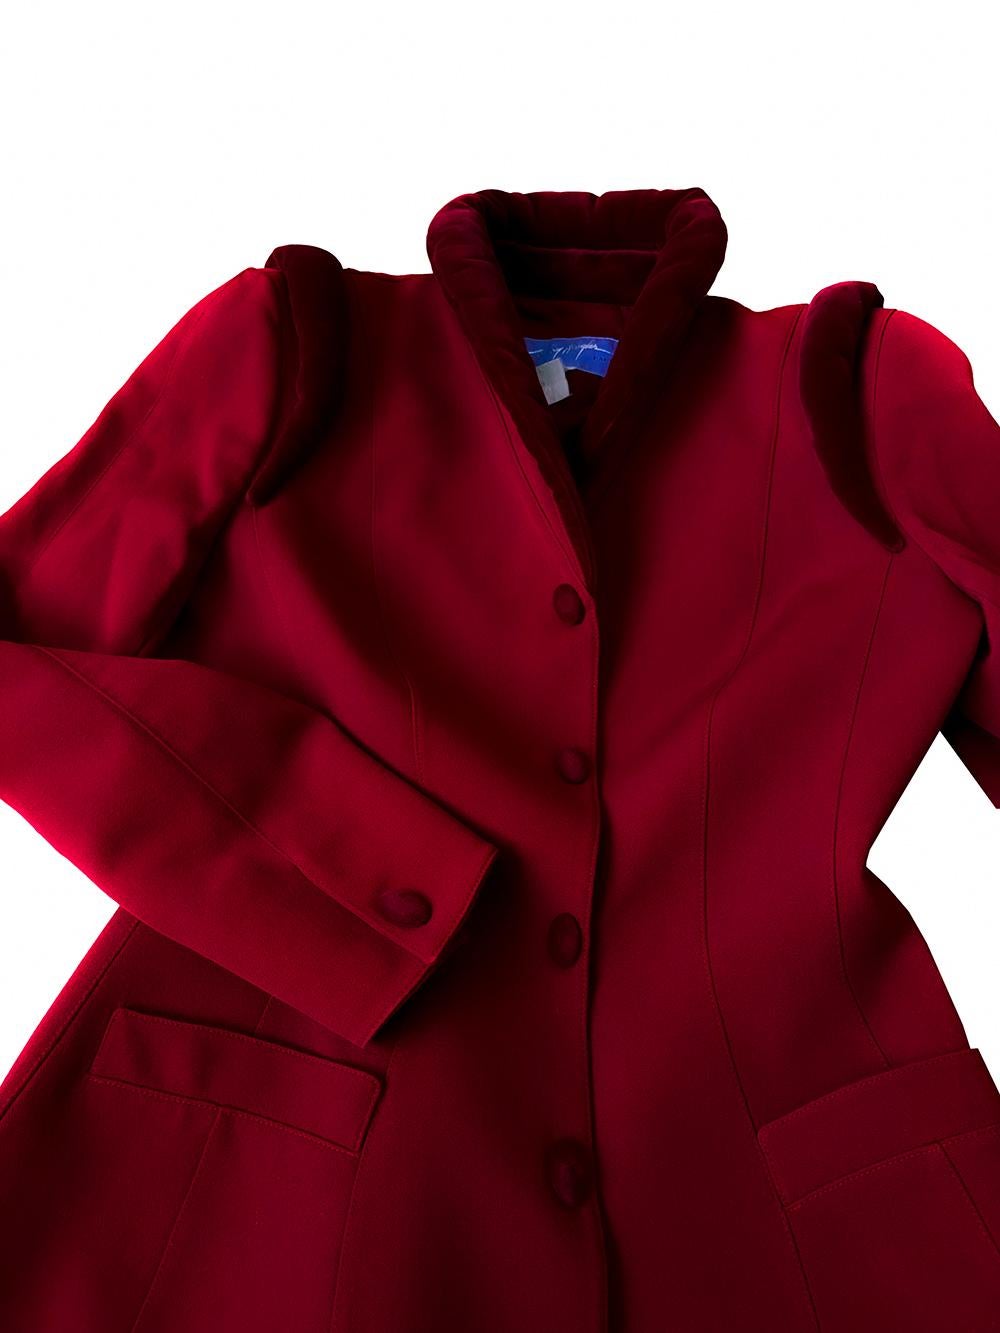 Thierry Mugler Archival FW 1997 Jacket Dramatic Sculptural Velvet Red For Sale 4